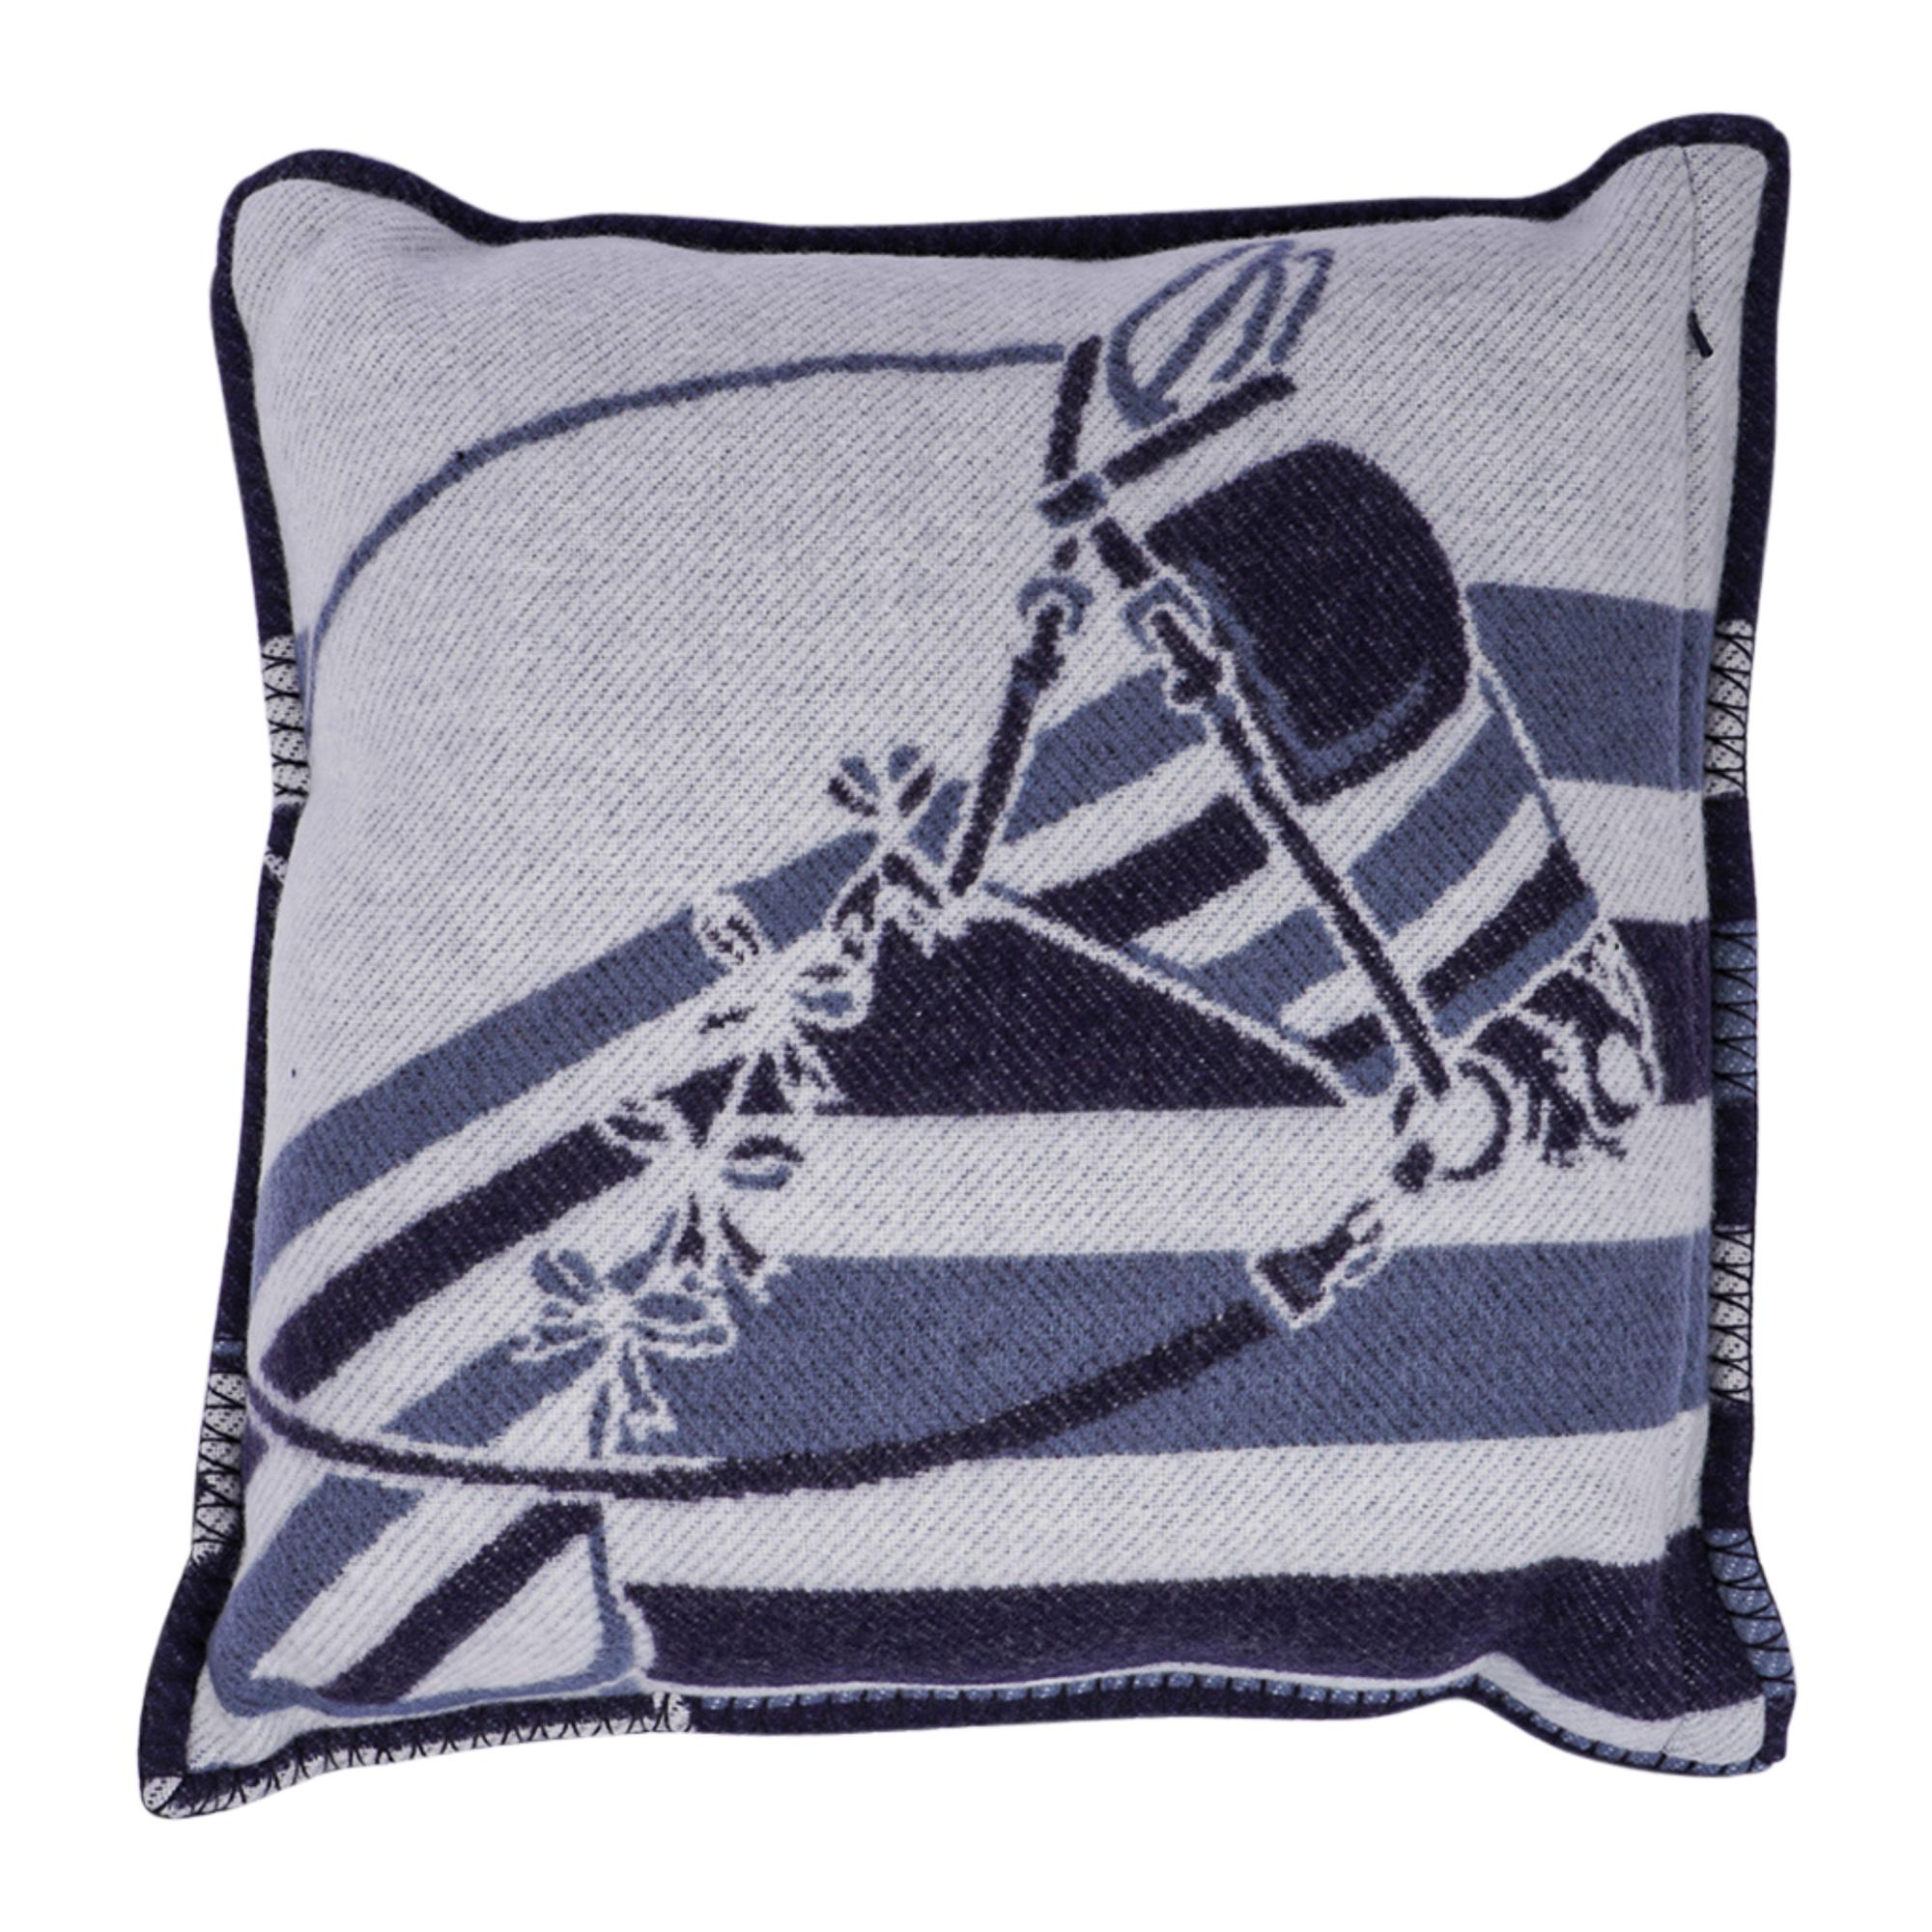 Mightychic offers a guaranteed authentic Hermes Limited Edition Couvertures Nouvelles pillow Blue Marine and Ecru.
Beautiful horse face with bows set with each side in inverted colours.
The removable cover is created from 85% Merino Wool and 15%